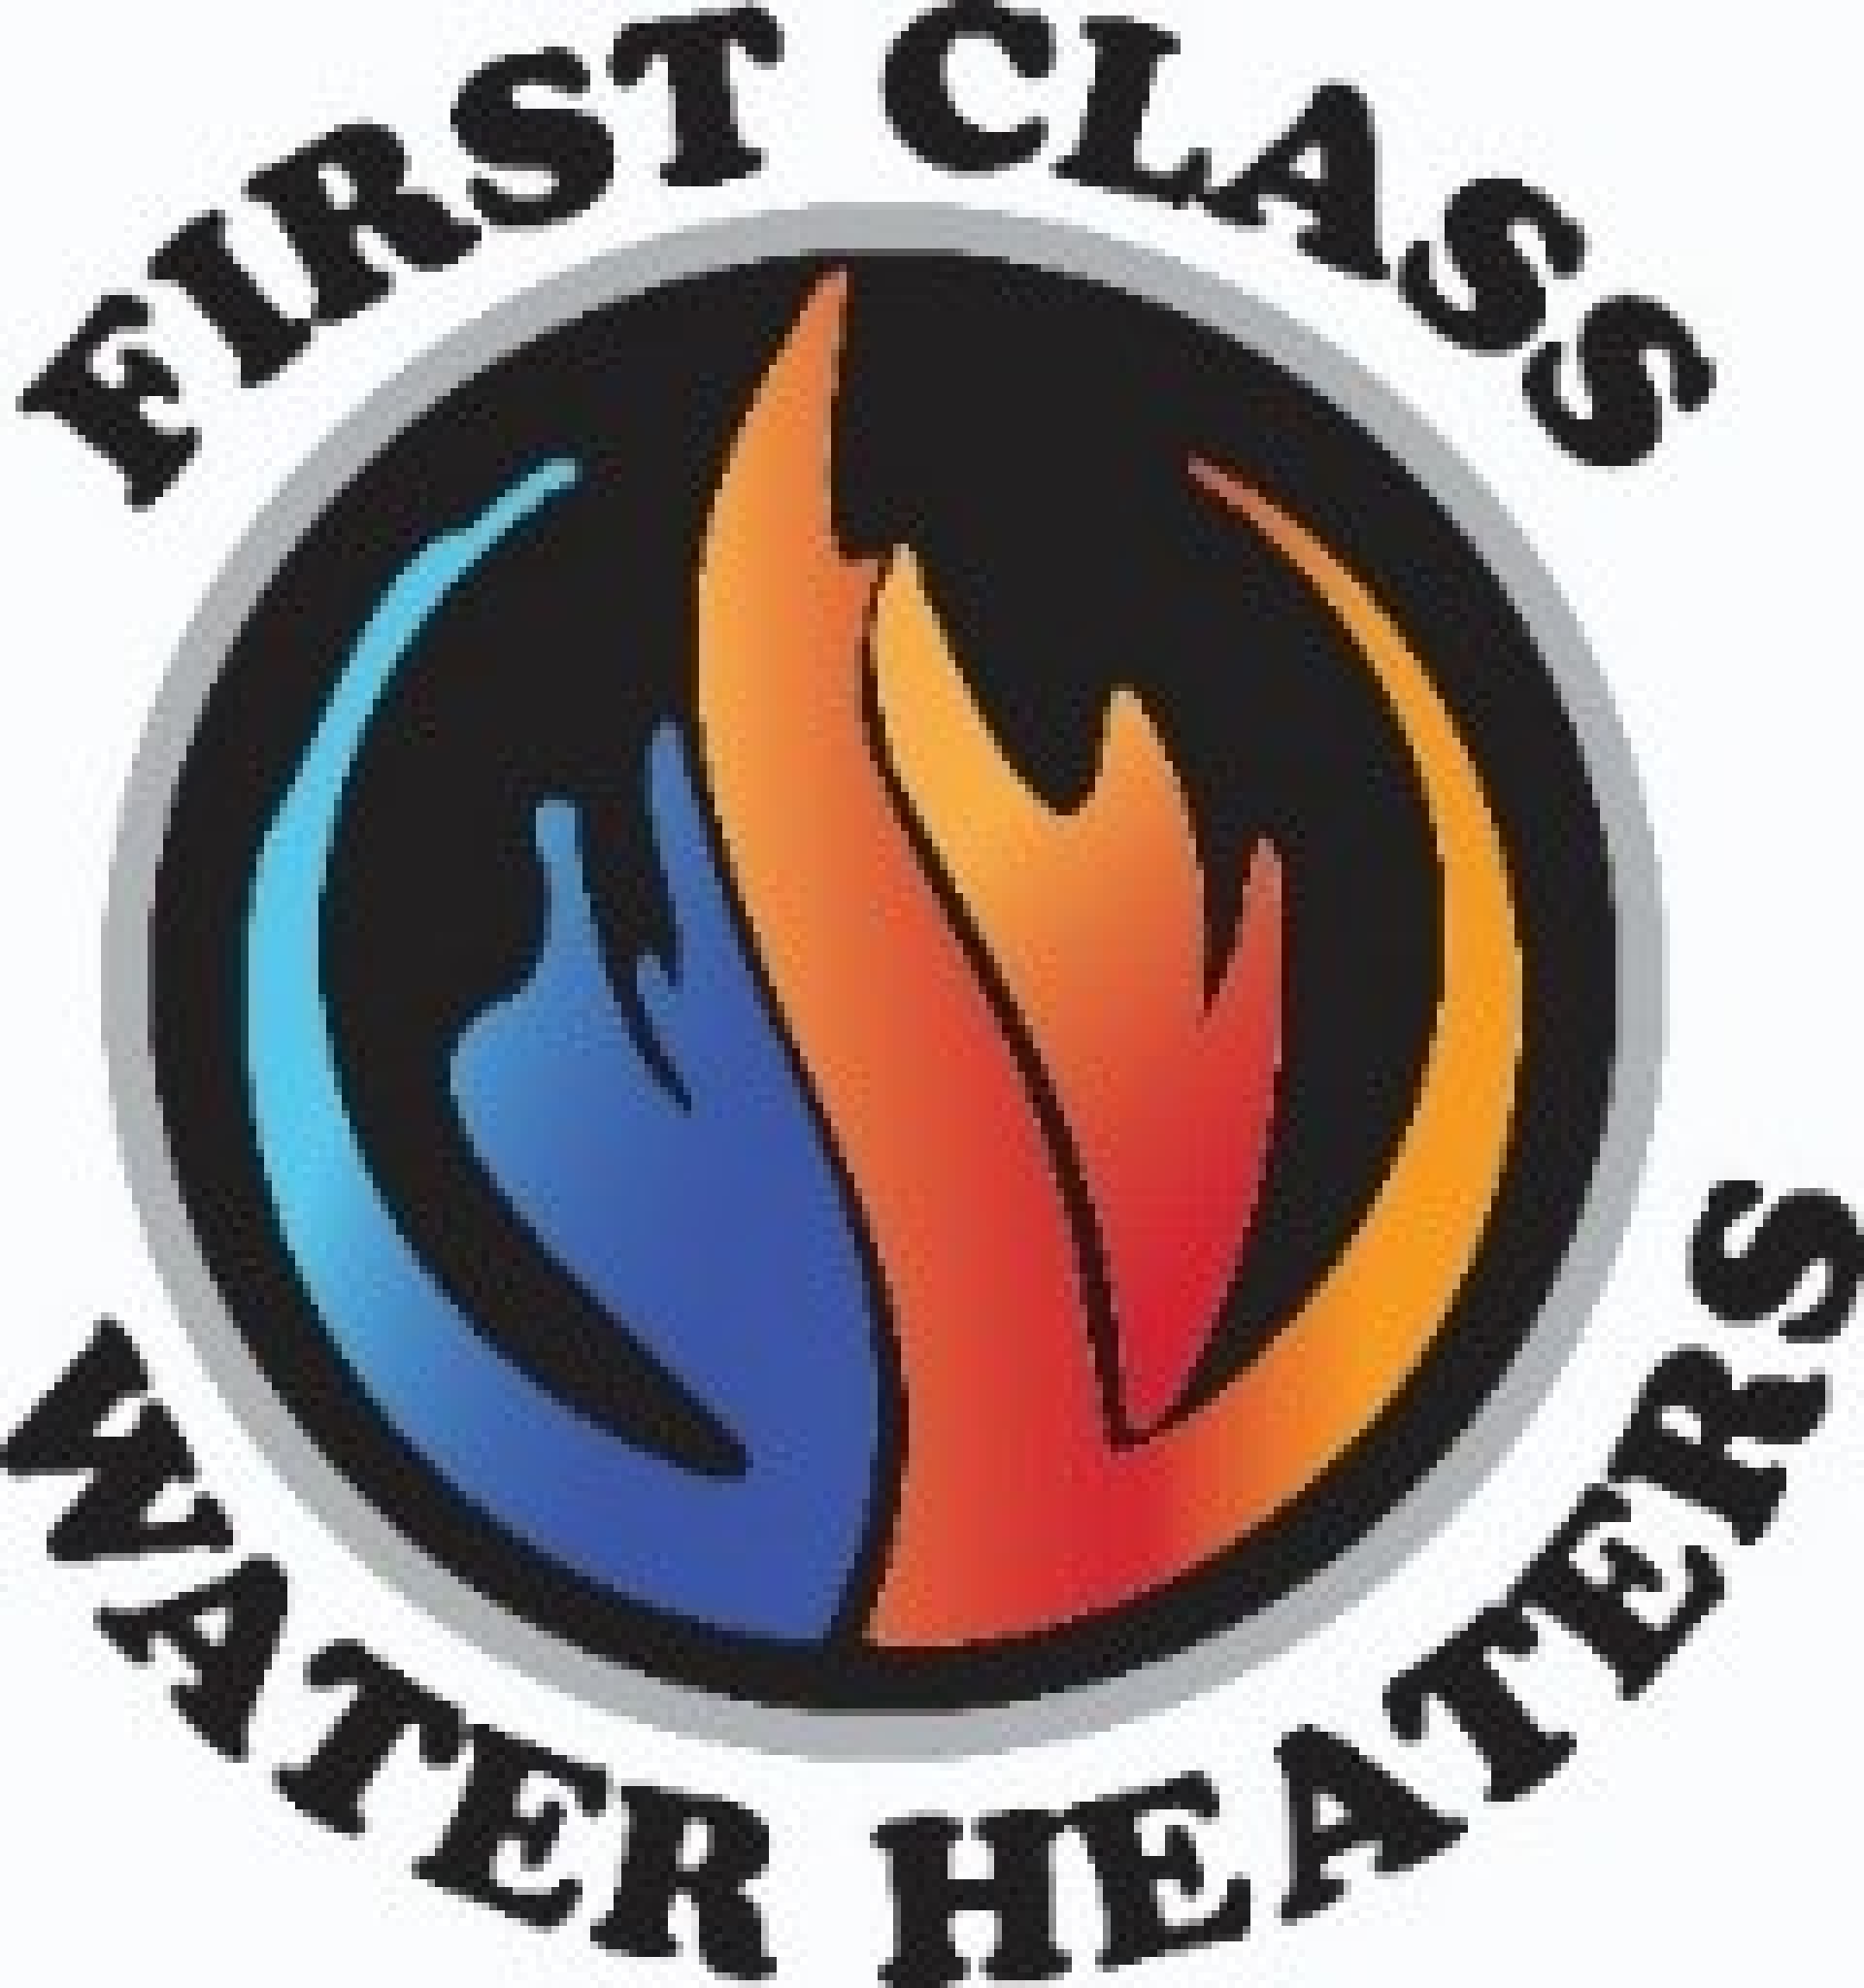 First Class Water Heaters